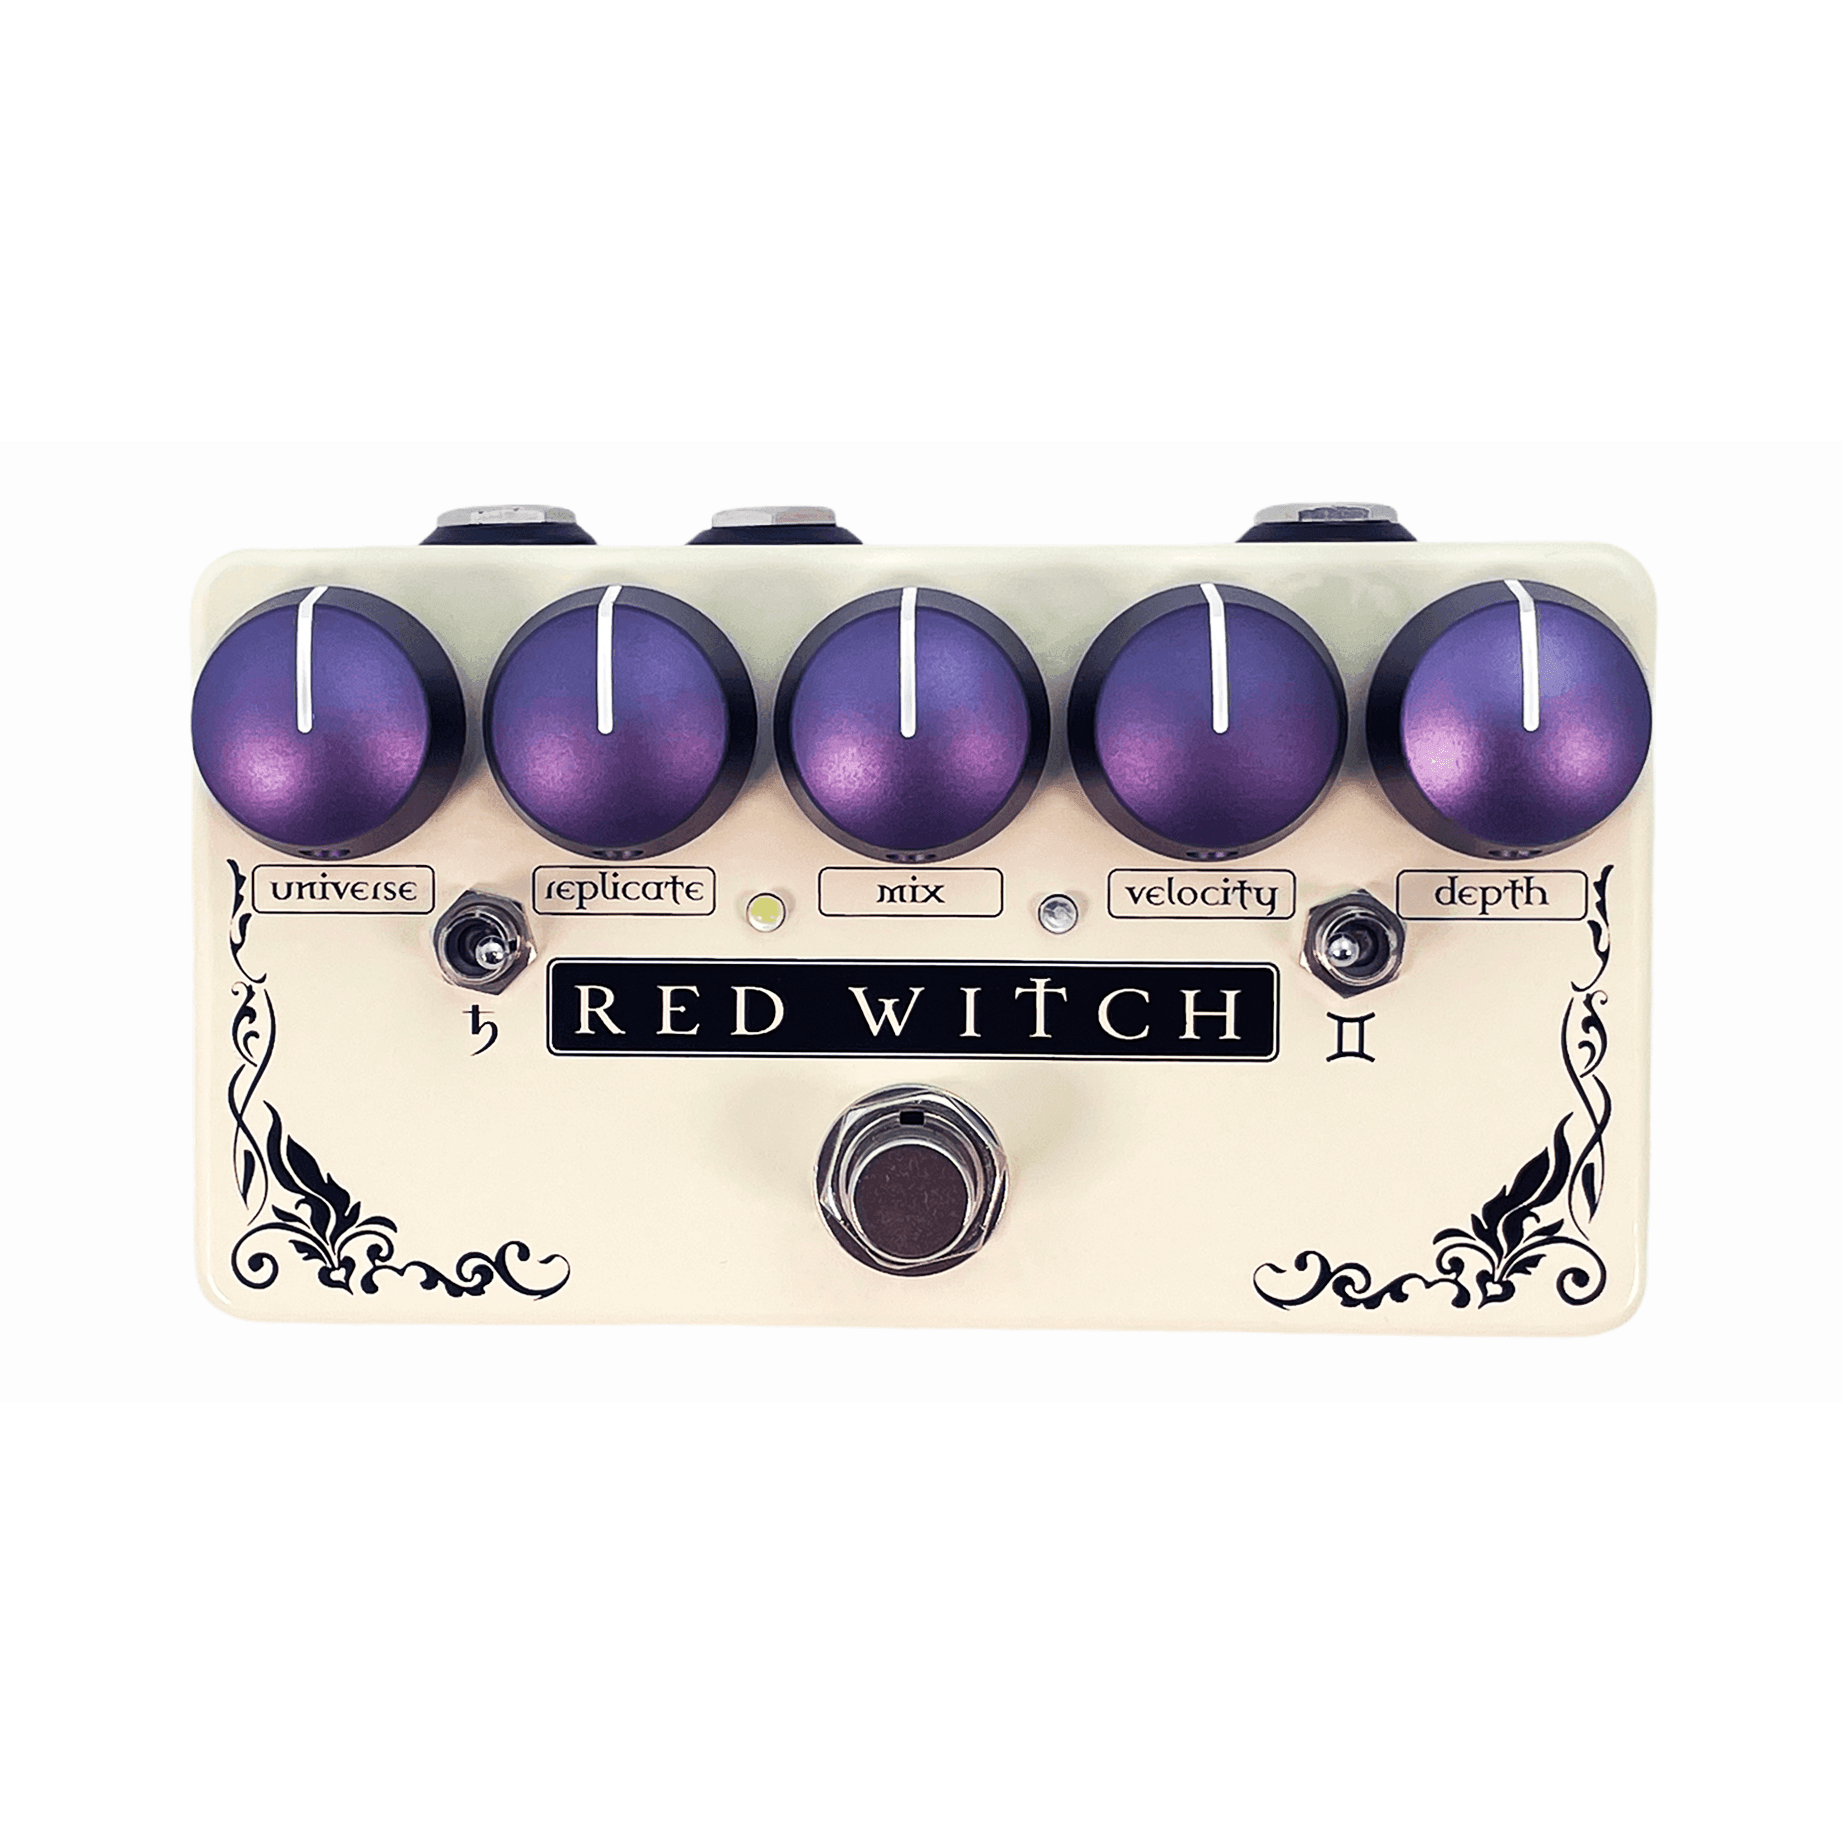 Red Witch Binary Star Delay Pedal - Guitar - Effects Pedals by Red Witch at Muso's Stuff